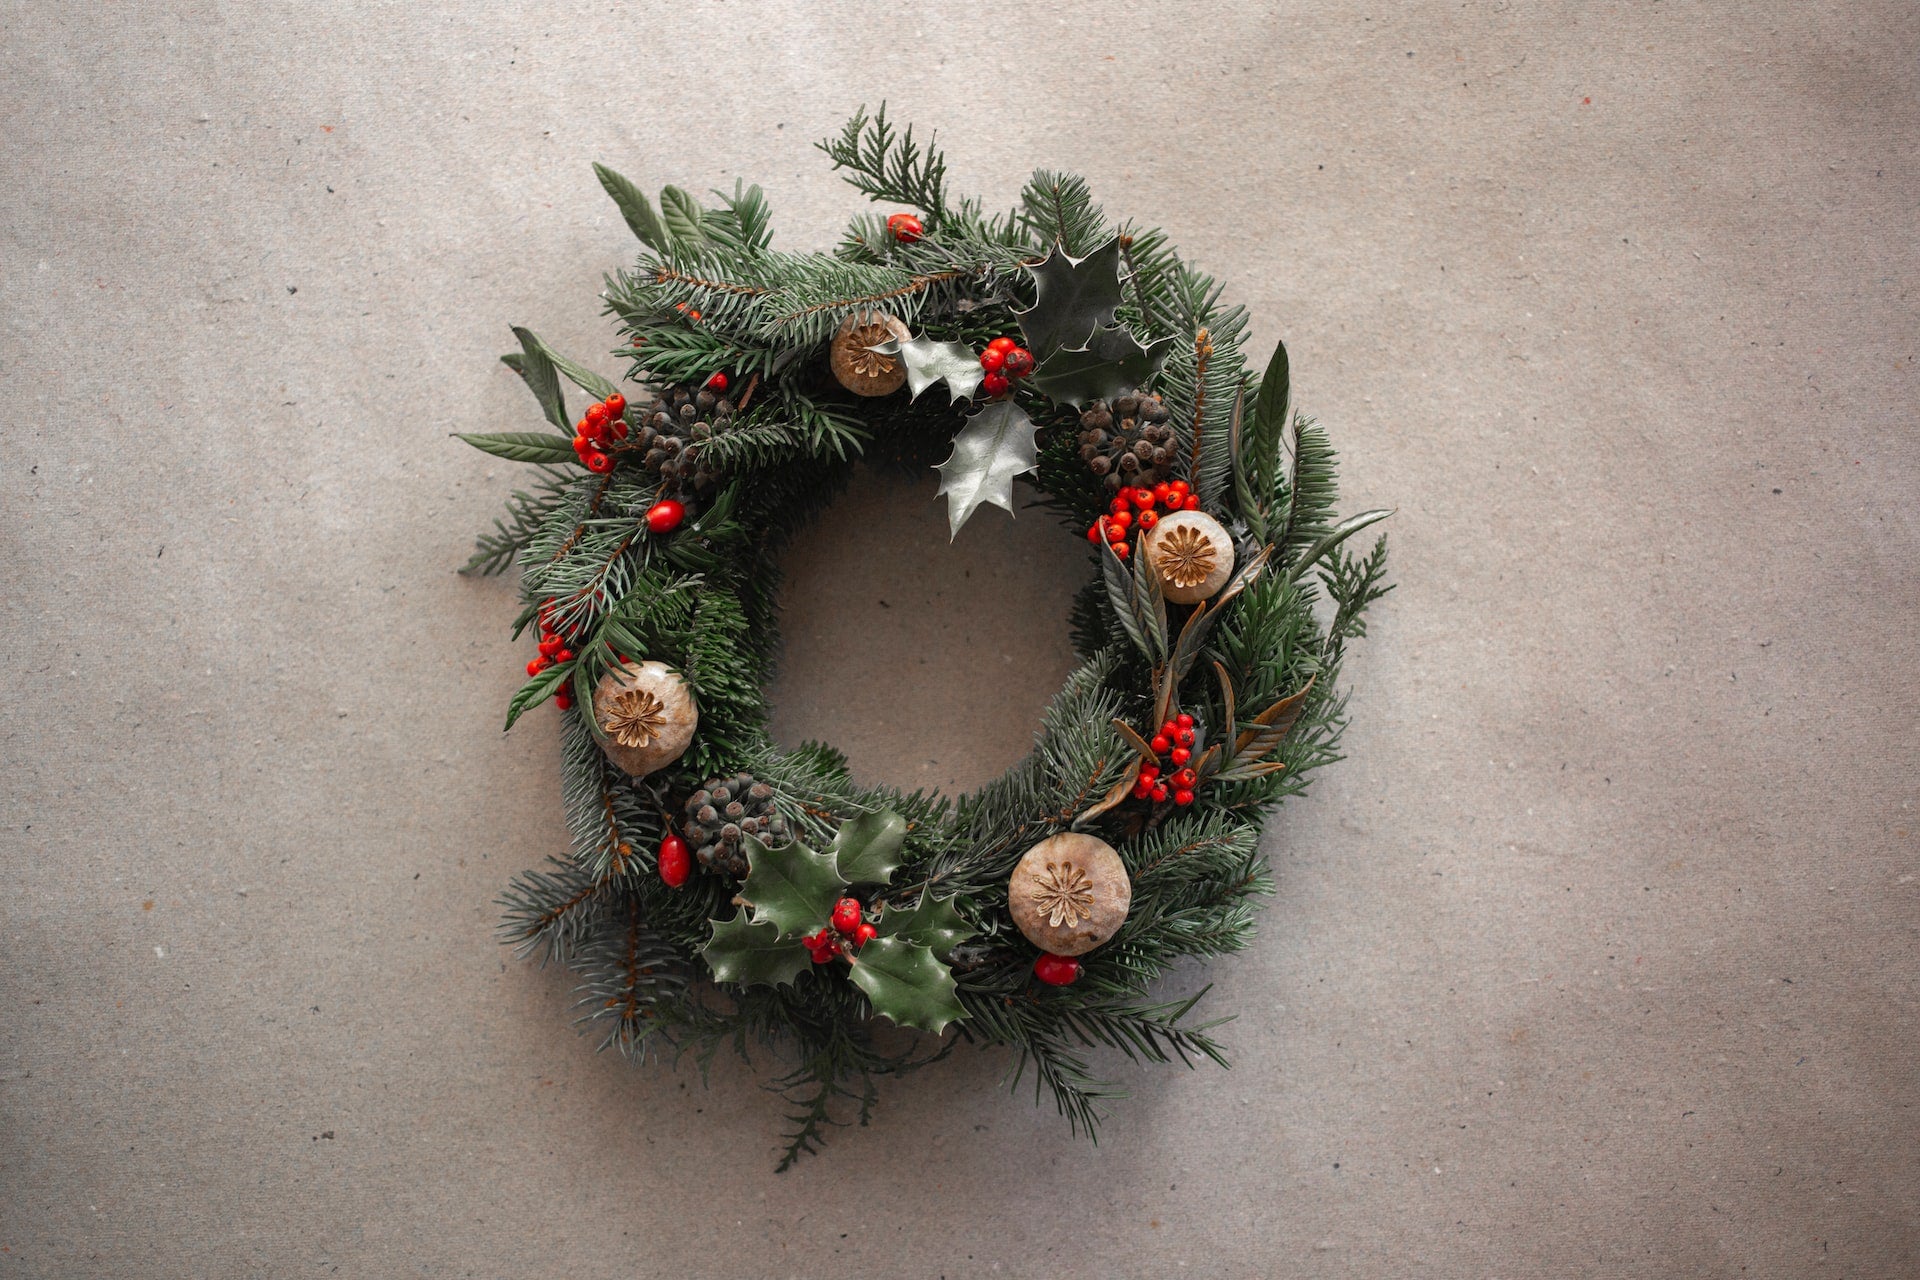 To improve curb appeal, decorate the porch with Christmas lights and the front door with an elegant wreath. An elegant Christmas wreath.